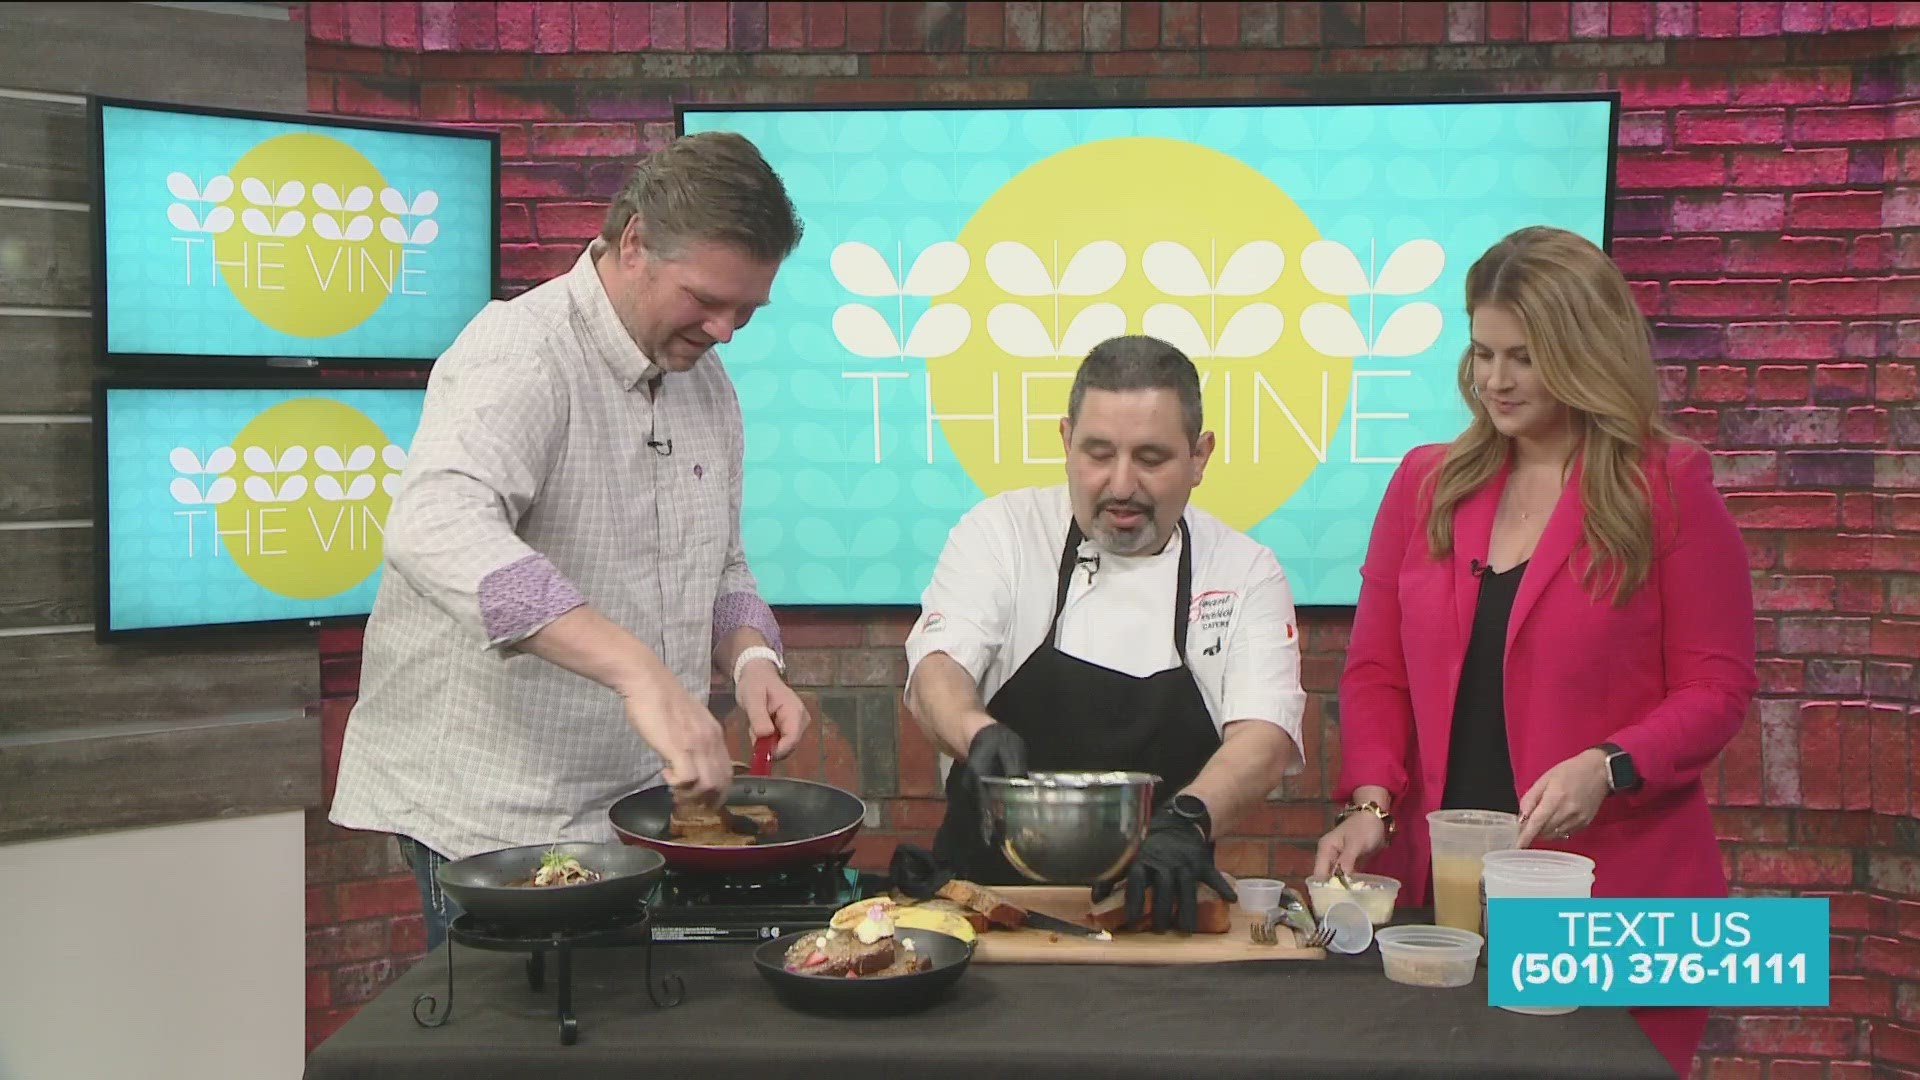 Chef Serge with Vibrant Catering stopped by the studio to whip up something delicious for Adam and Ashley!